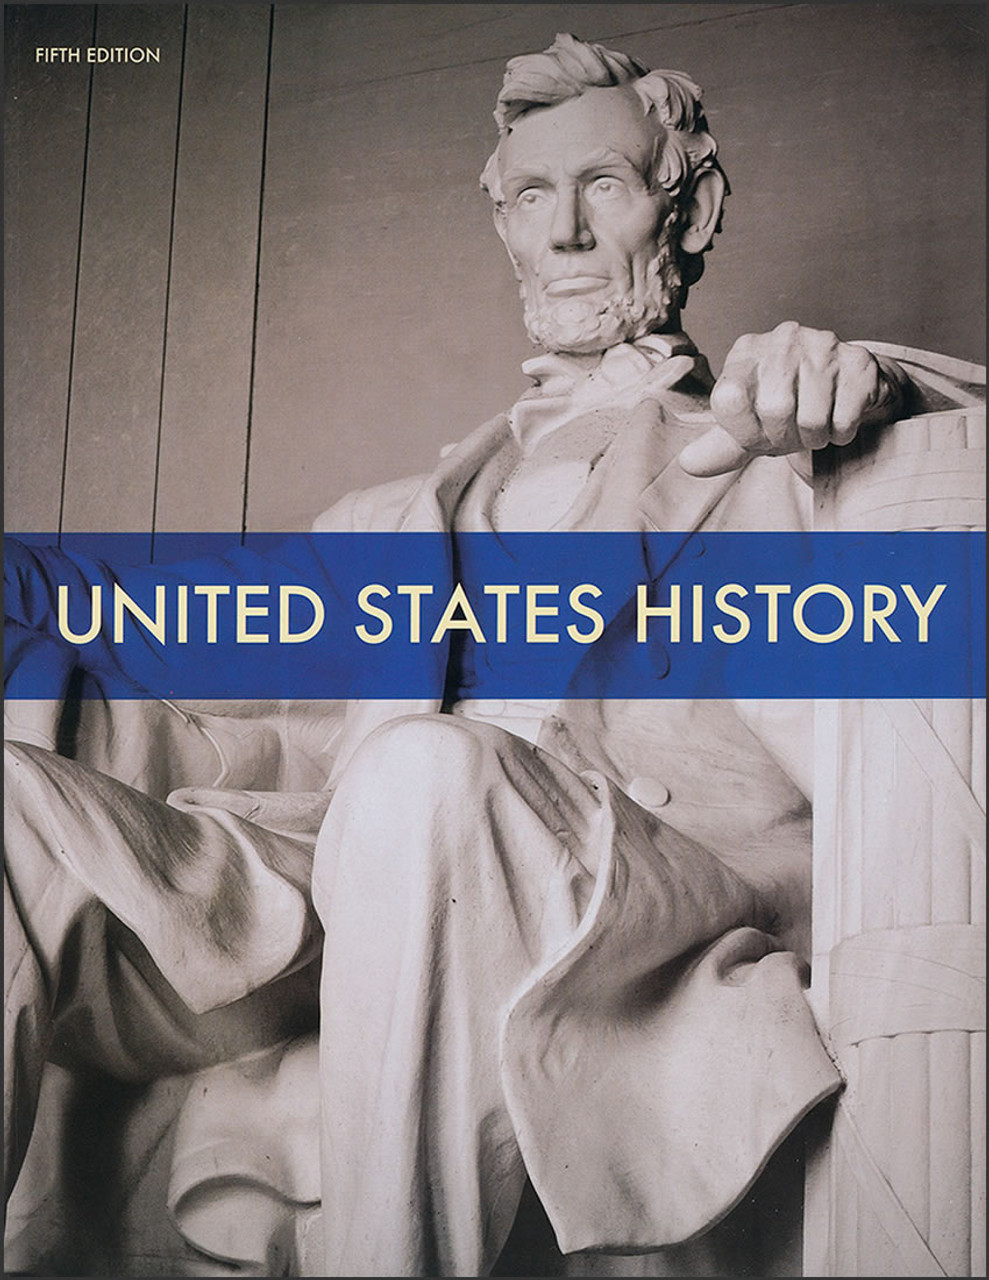 edition　Christian　States　5th　History,　United　Liberty